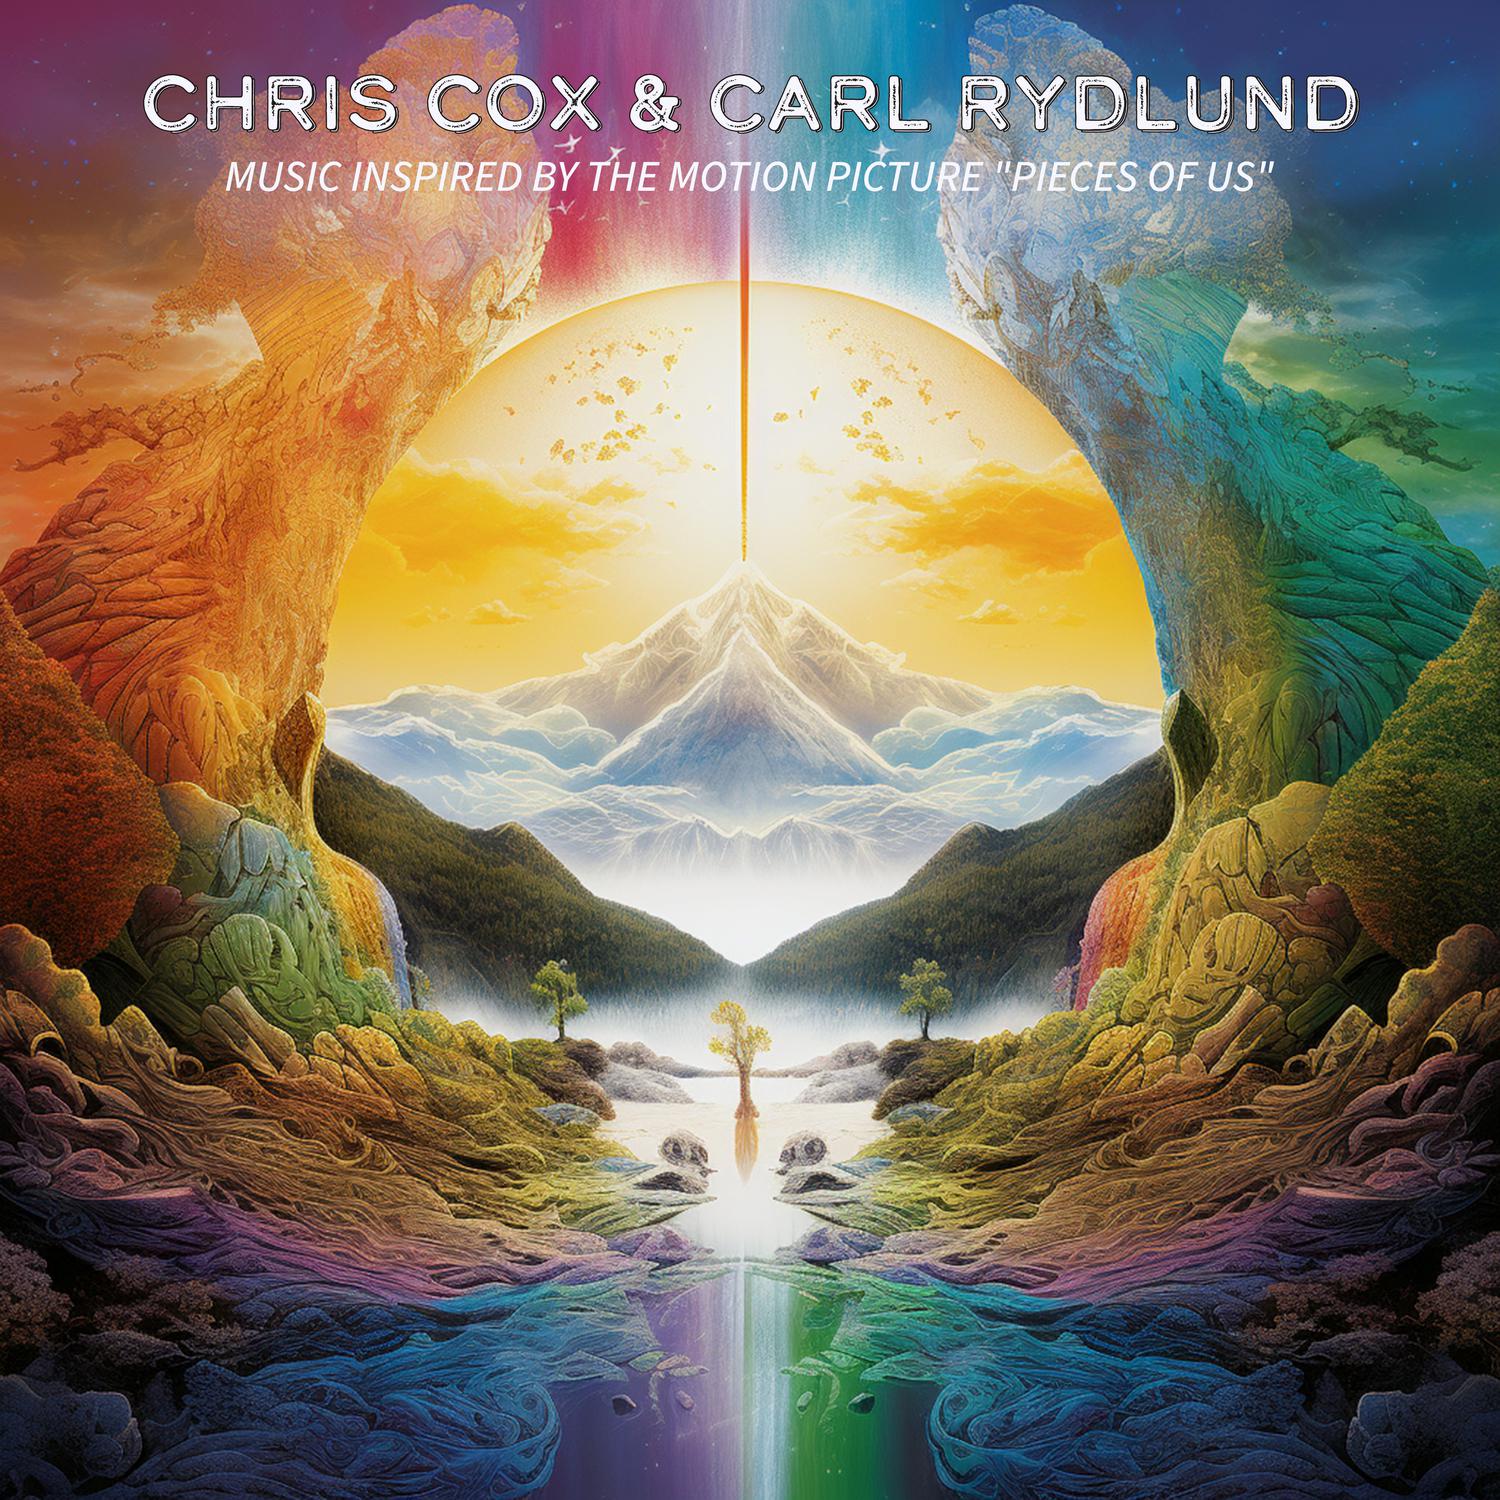 Chris Cox - Dreamscapes In Harmony